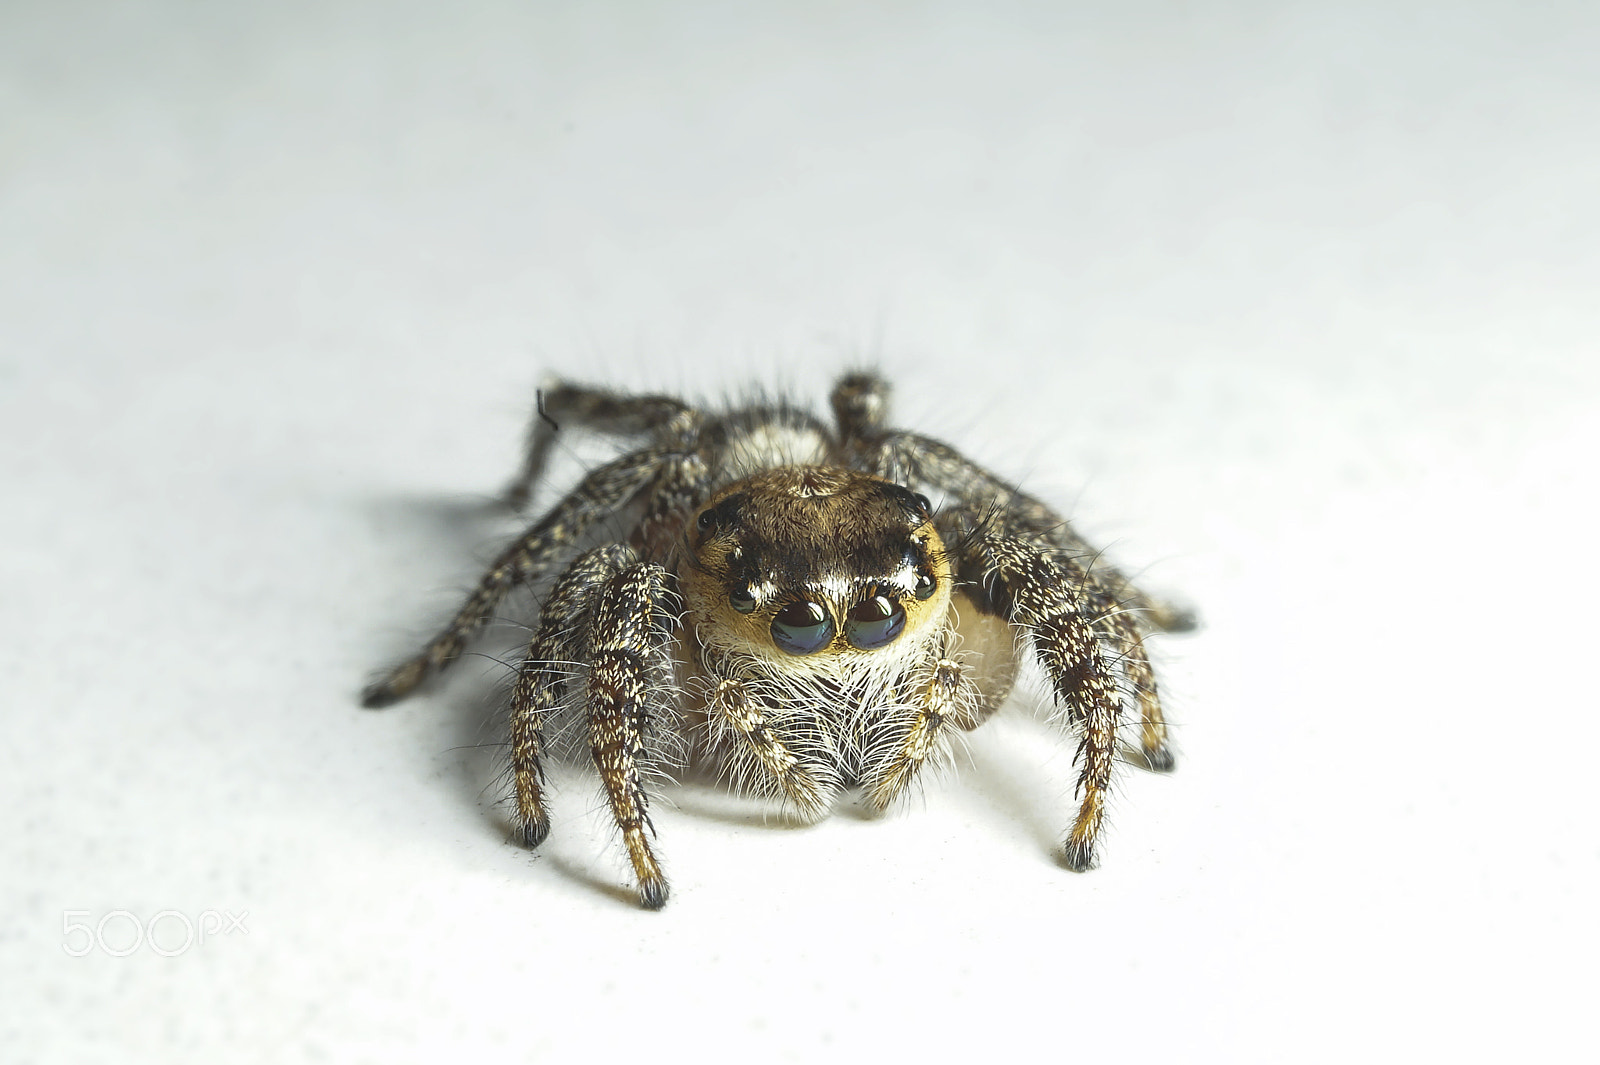 65mm F2.8 sample photo. Jumping spider (salticidae) photography